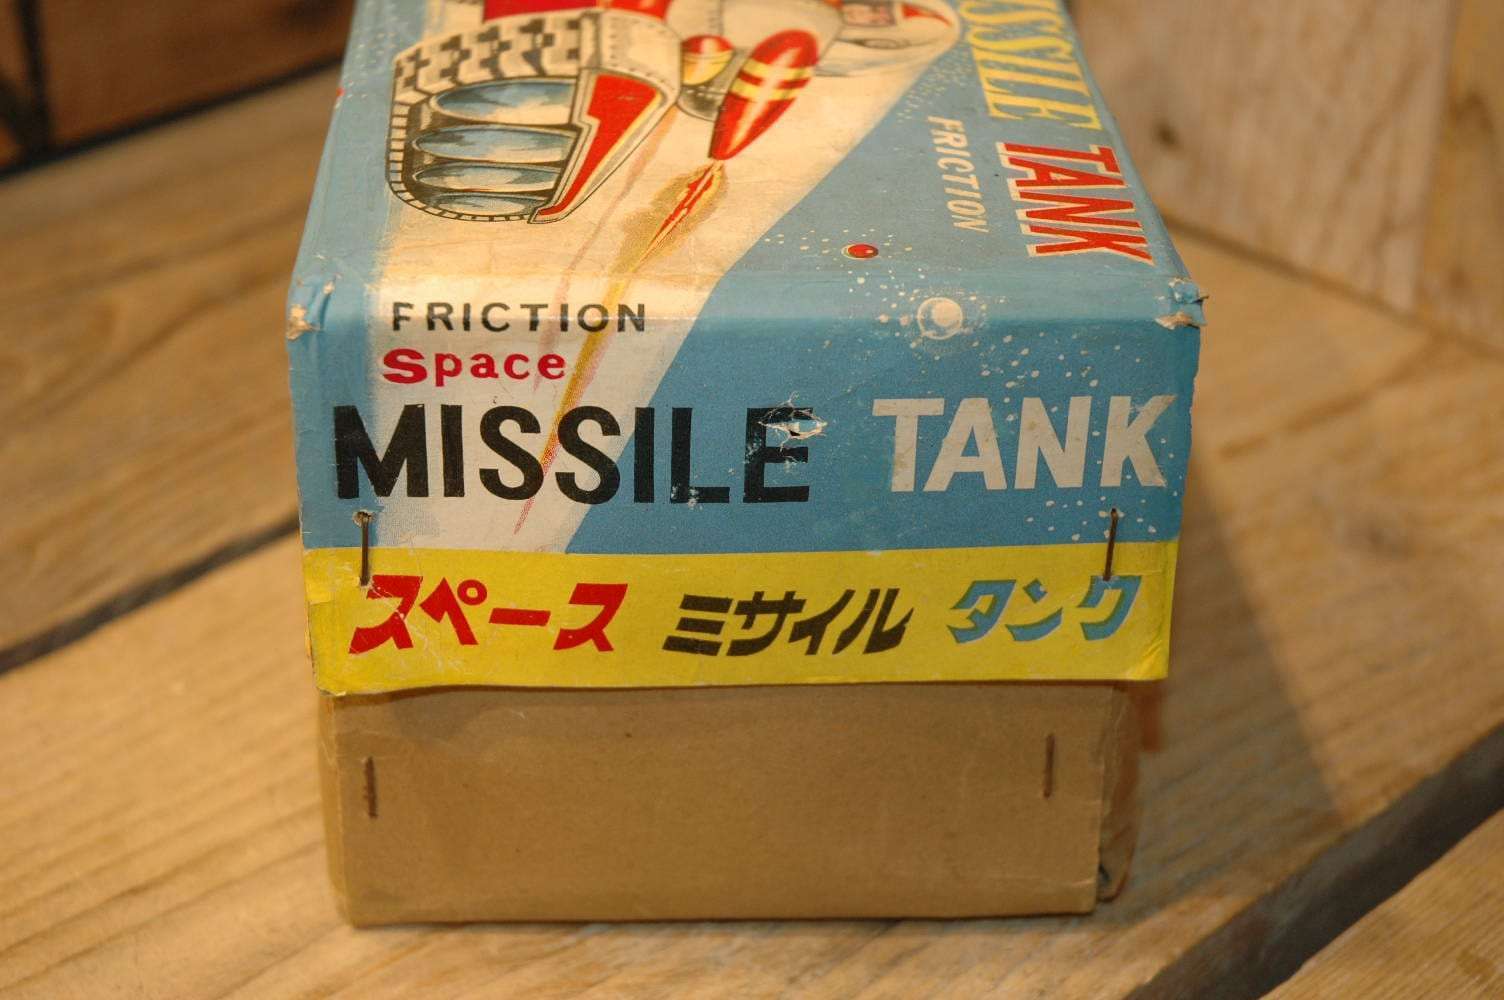 daito - Space Missile Tank